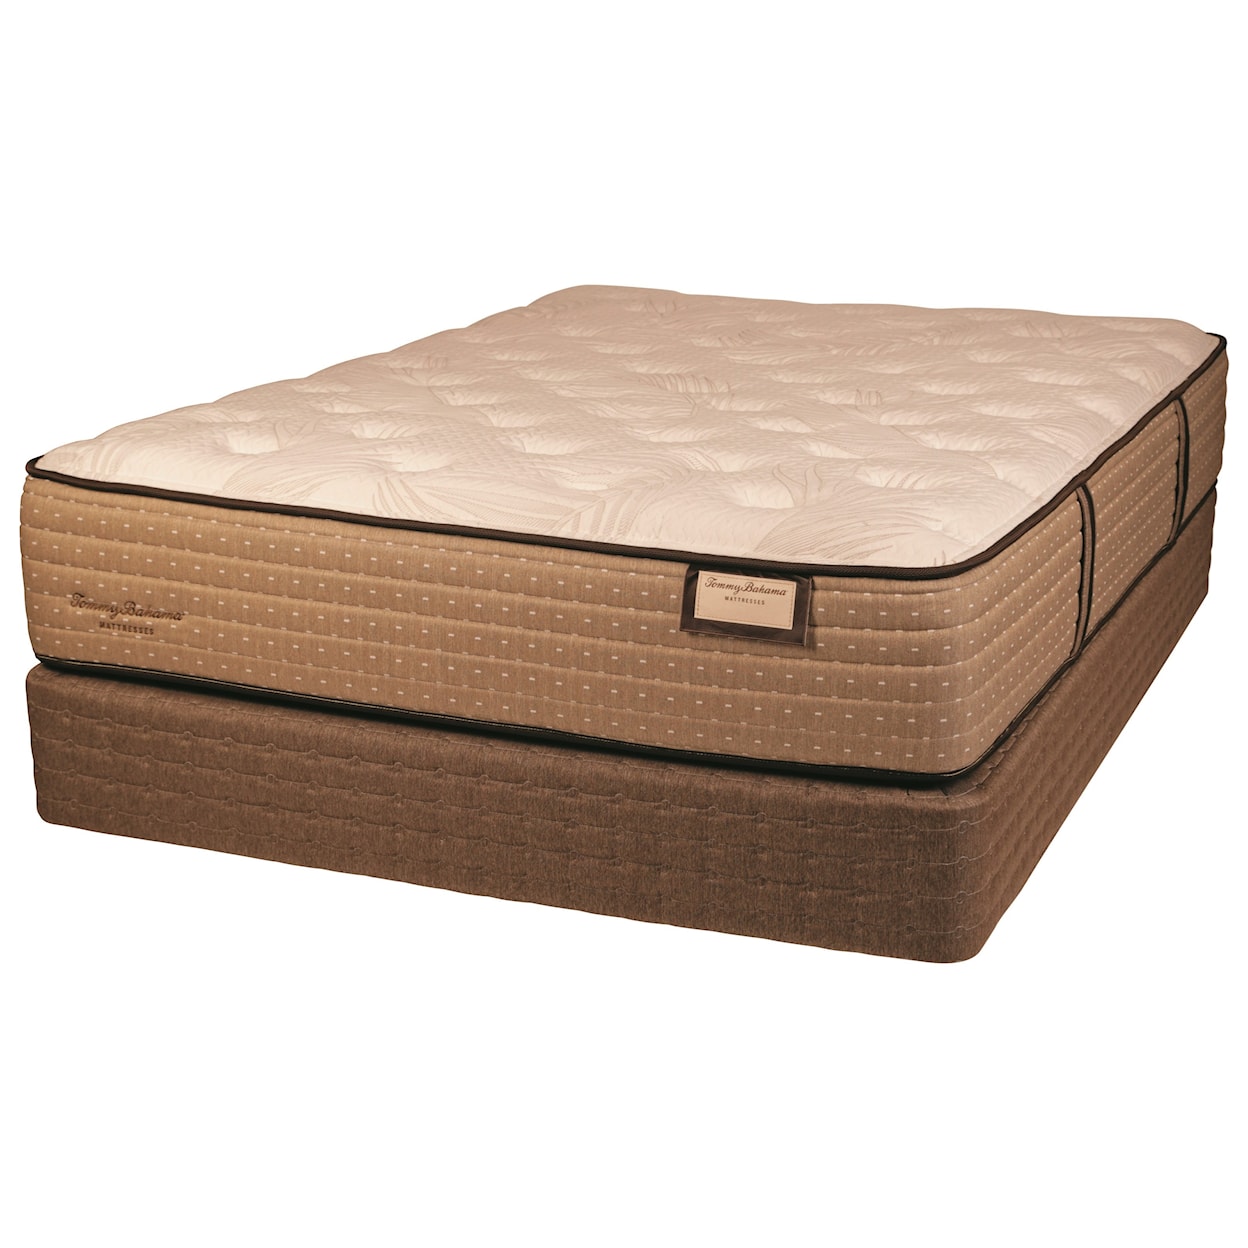 Therapedic Tommy Bahama Shake the Sand Firm 6034 King Firm Luxury Mattress Set